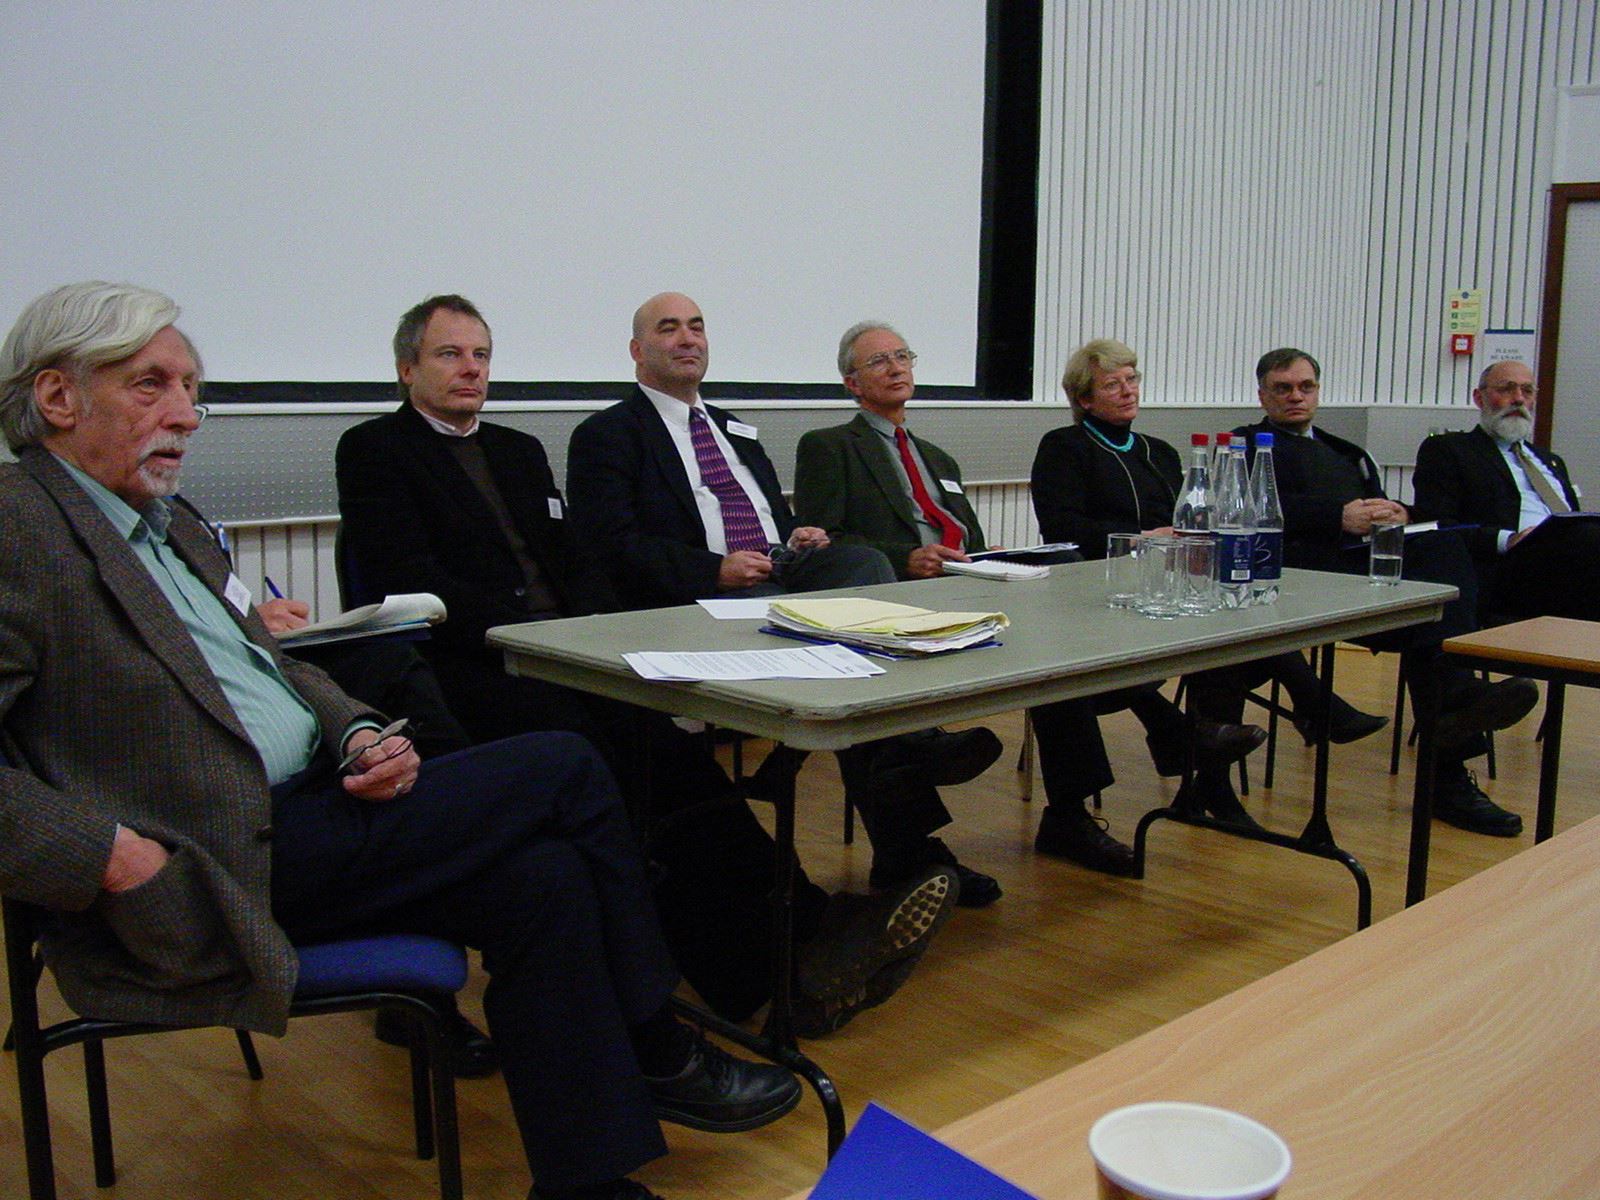 Paul Oliver (left) with leading lights of vernacular architecture study at the Oxford conference, 2006